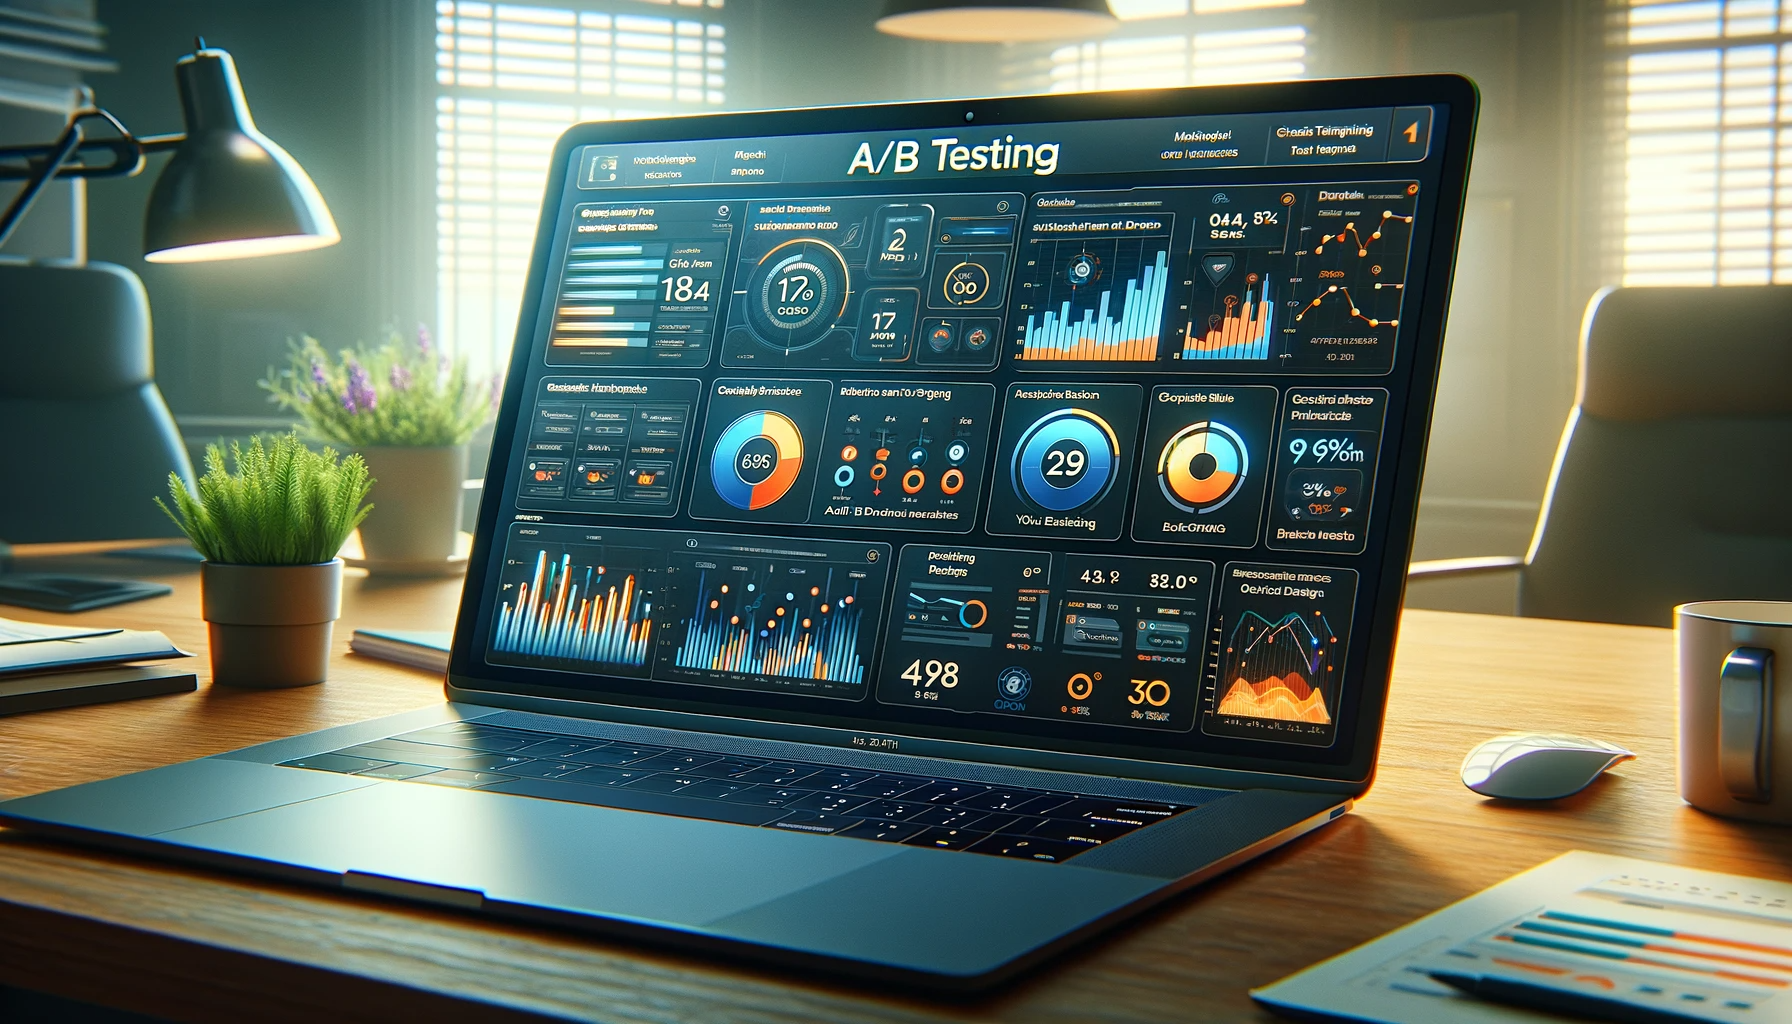 DALL·E 2024-01-31 18.46.46 - Create a cinematic, photorealistic image in a 16_9 aspect ratio depicting a laptop screen displaying various graphs and charts related to A_B testing 